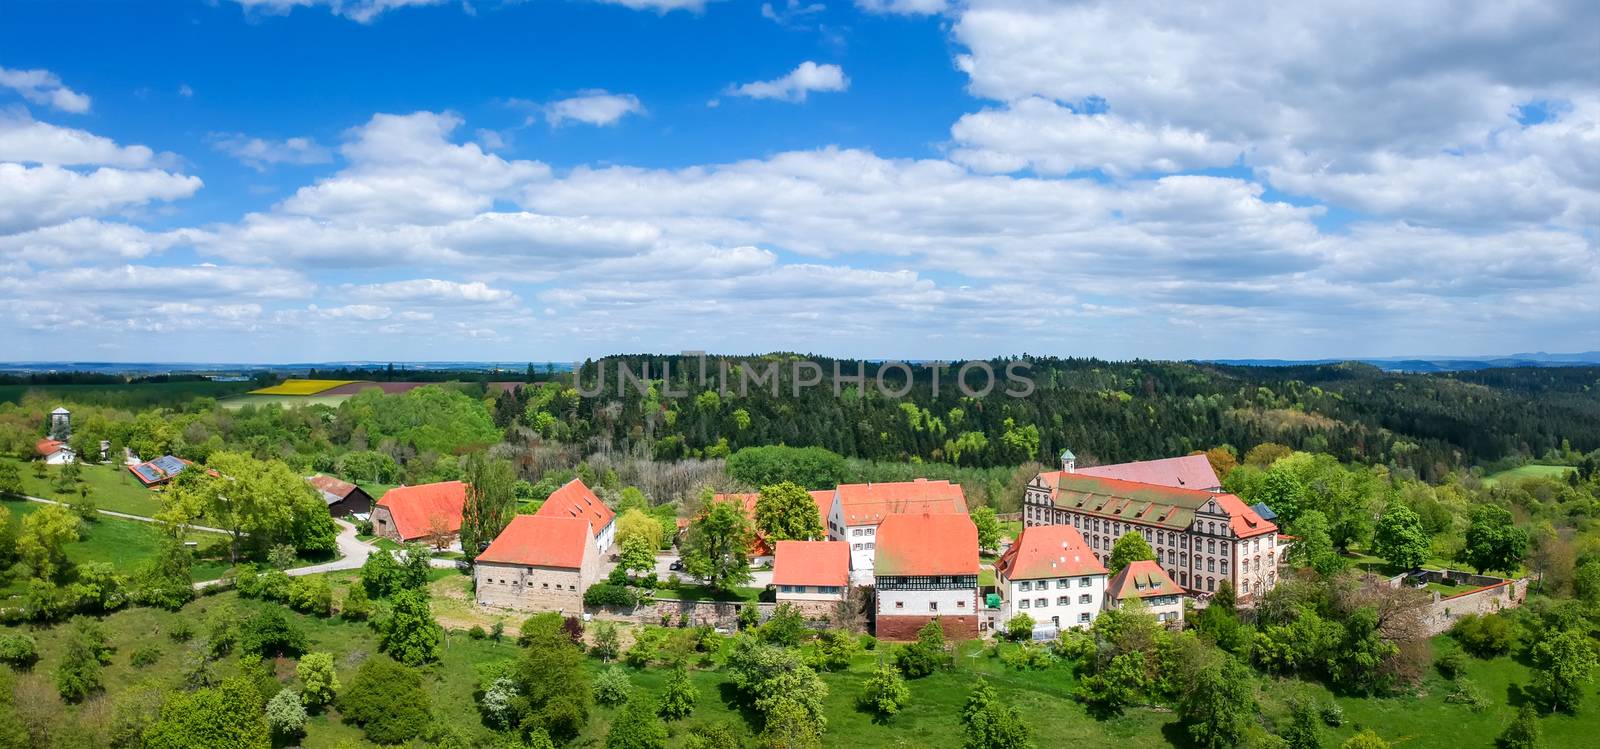 An image of the Kirchberg convent monastery located at Sulz Germany